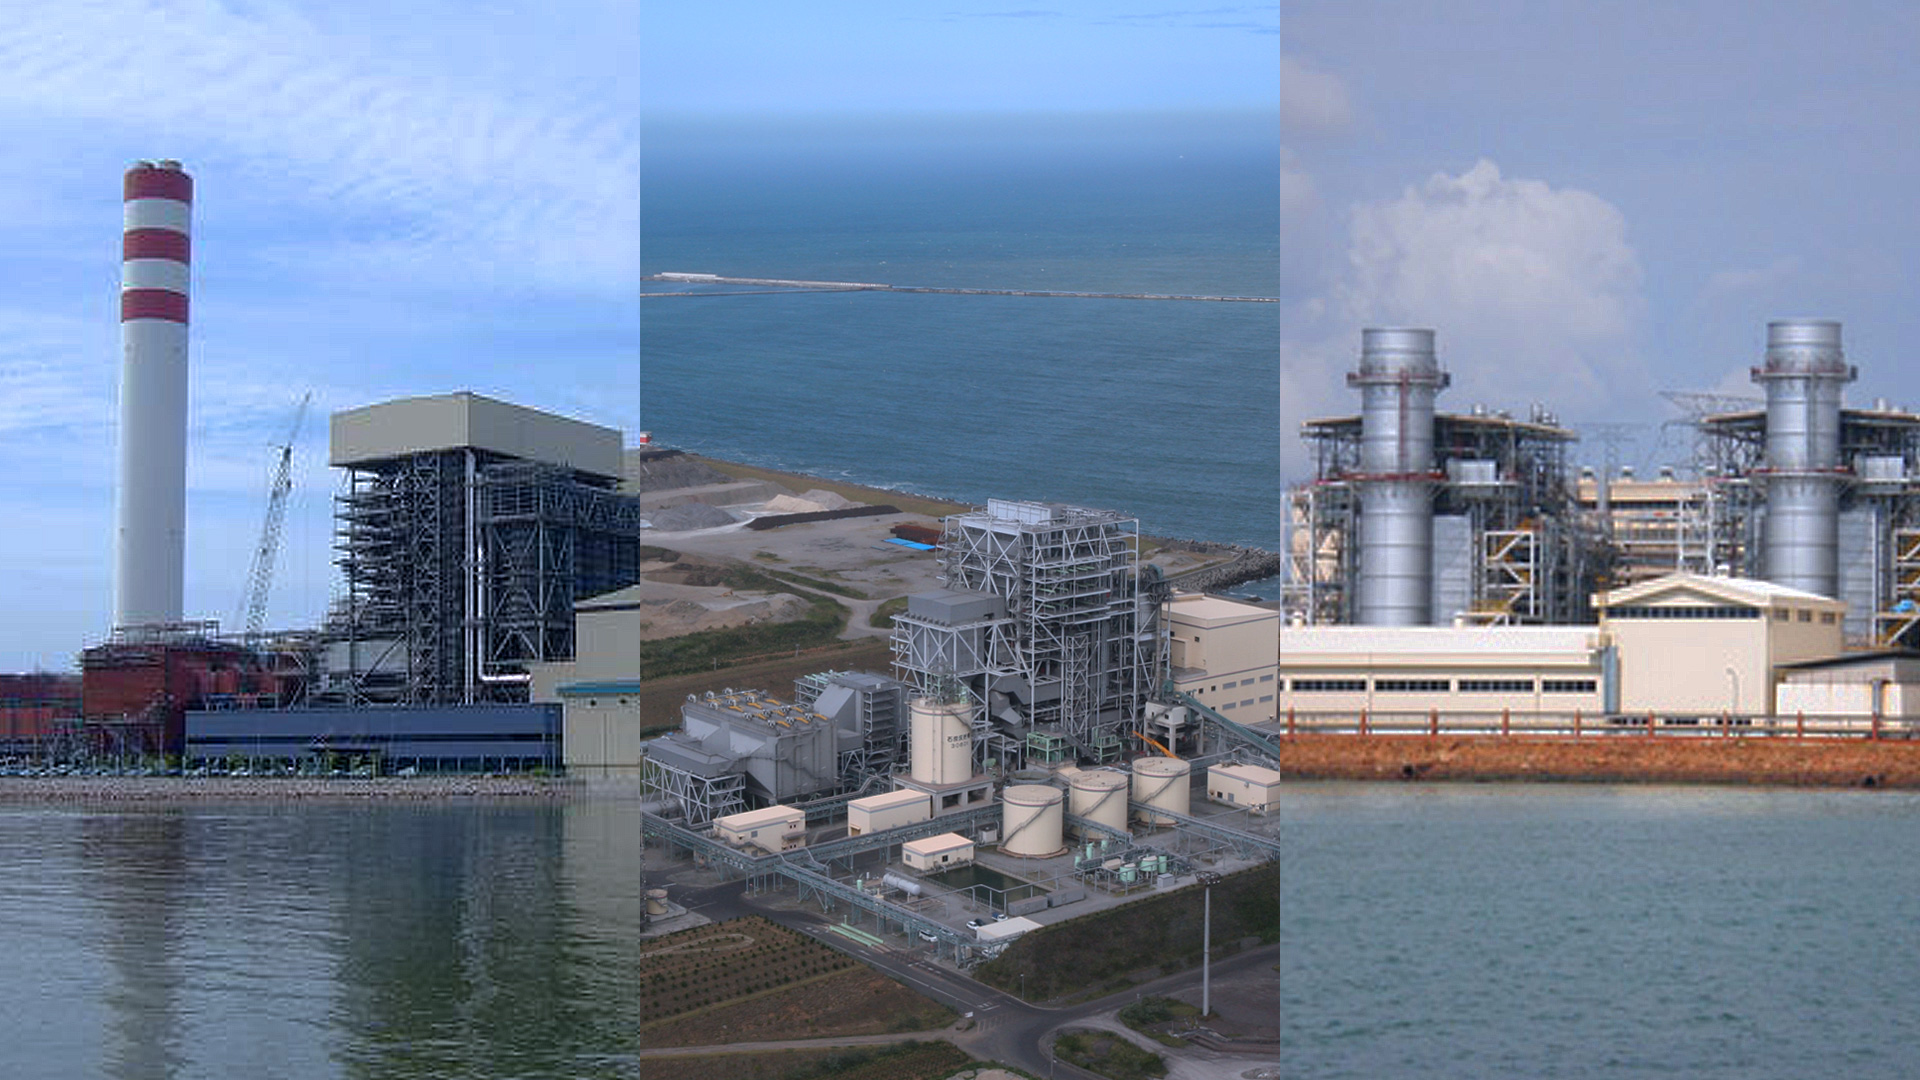 For stable power plant operation, Toshiba provides fine solutions throughout the power plant's life cycle